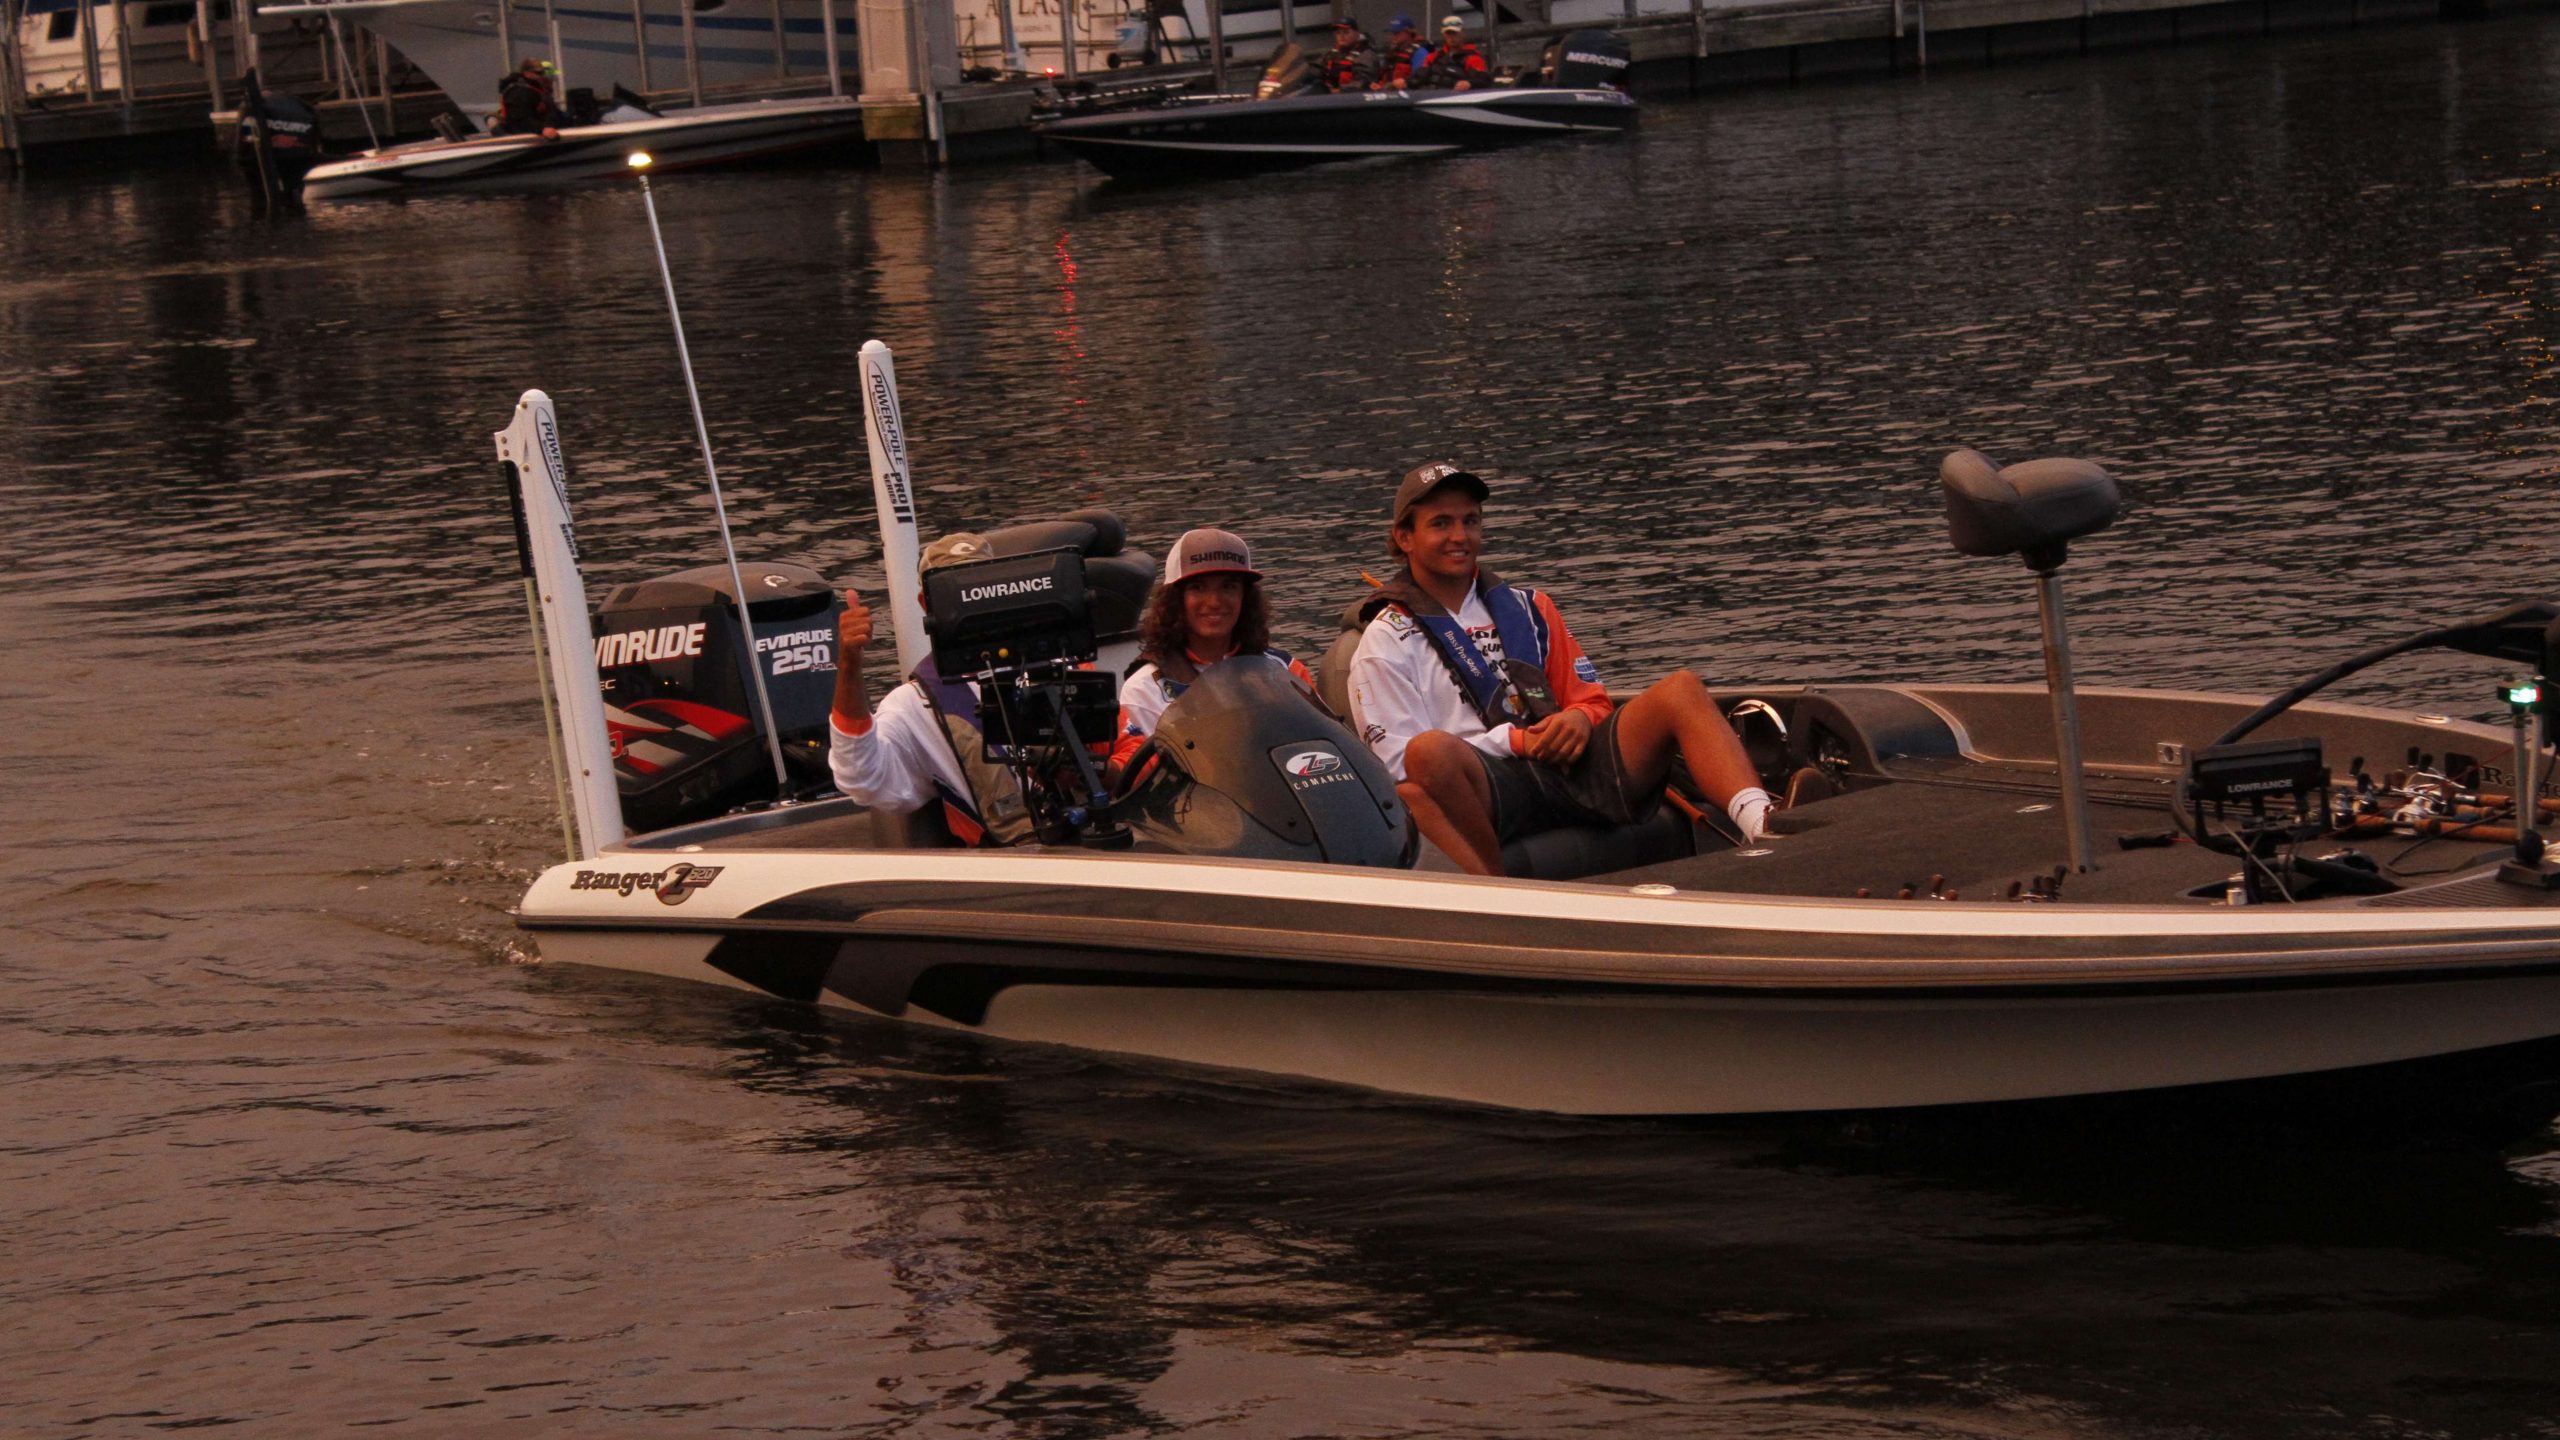 The anglers are in clear view, but itâs the driver that gives the thumbs-up from behind his Lowrance.